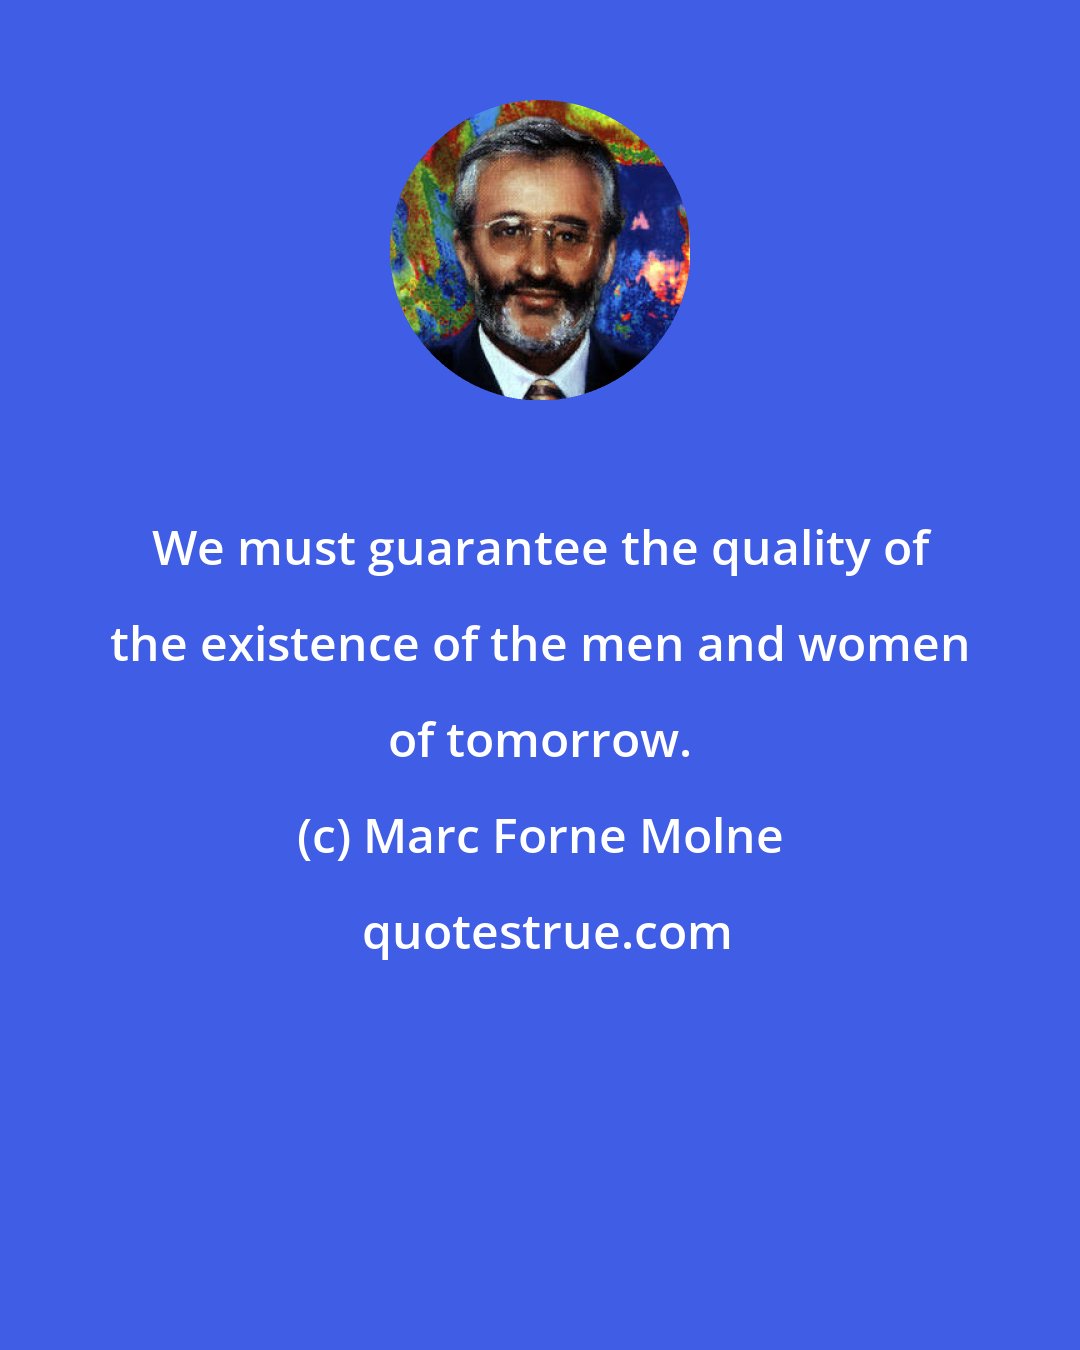 Marc Forne Molne: We must guarantee the quality of the existence of the men and women of tomorrow.